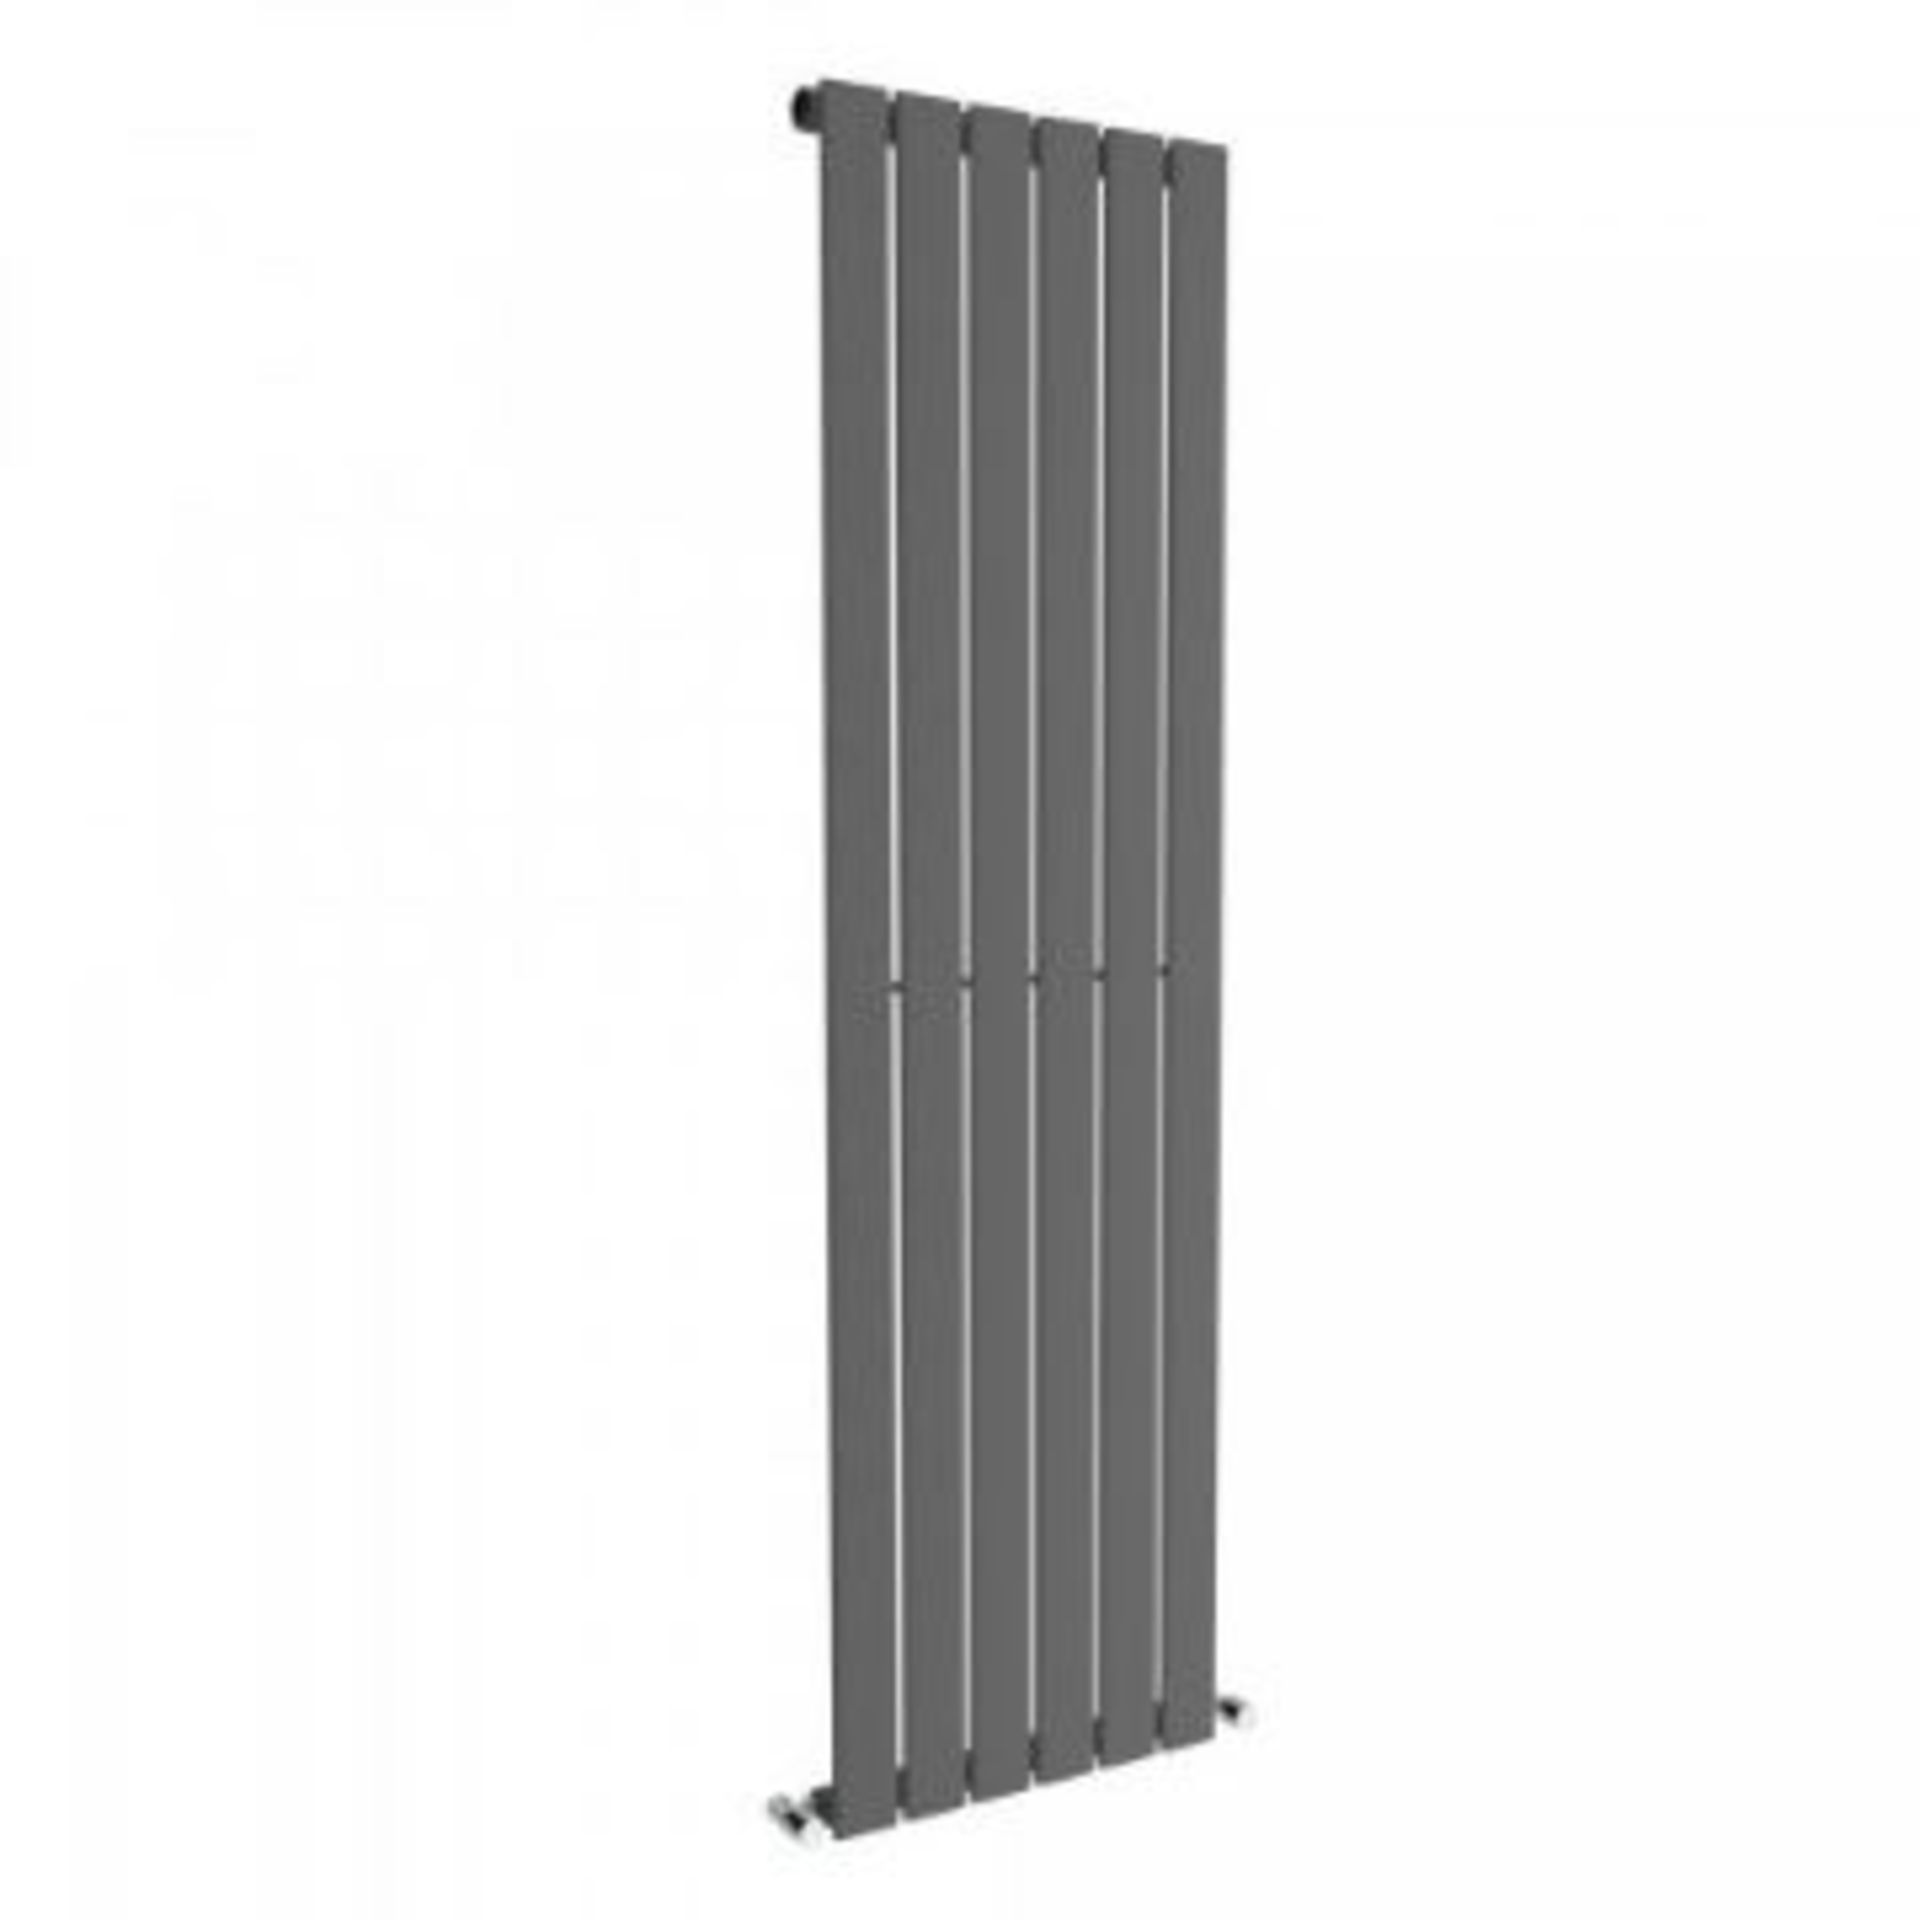 NEW & BOXED 1600x452mm Anthracite Single Flat Panel Vertical Radiator. RC209.RRP £307.99 each... - Image 2 of 2